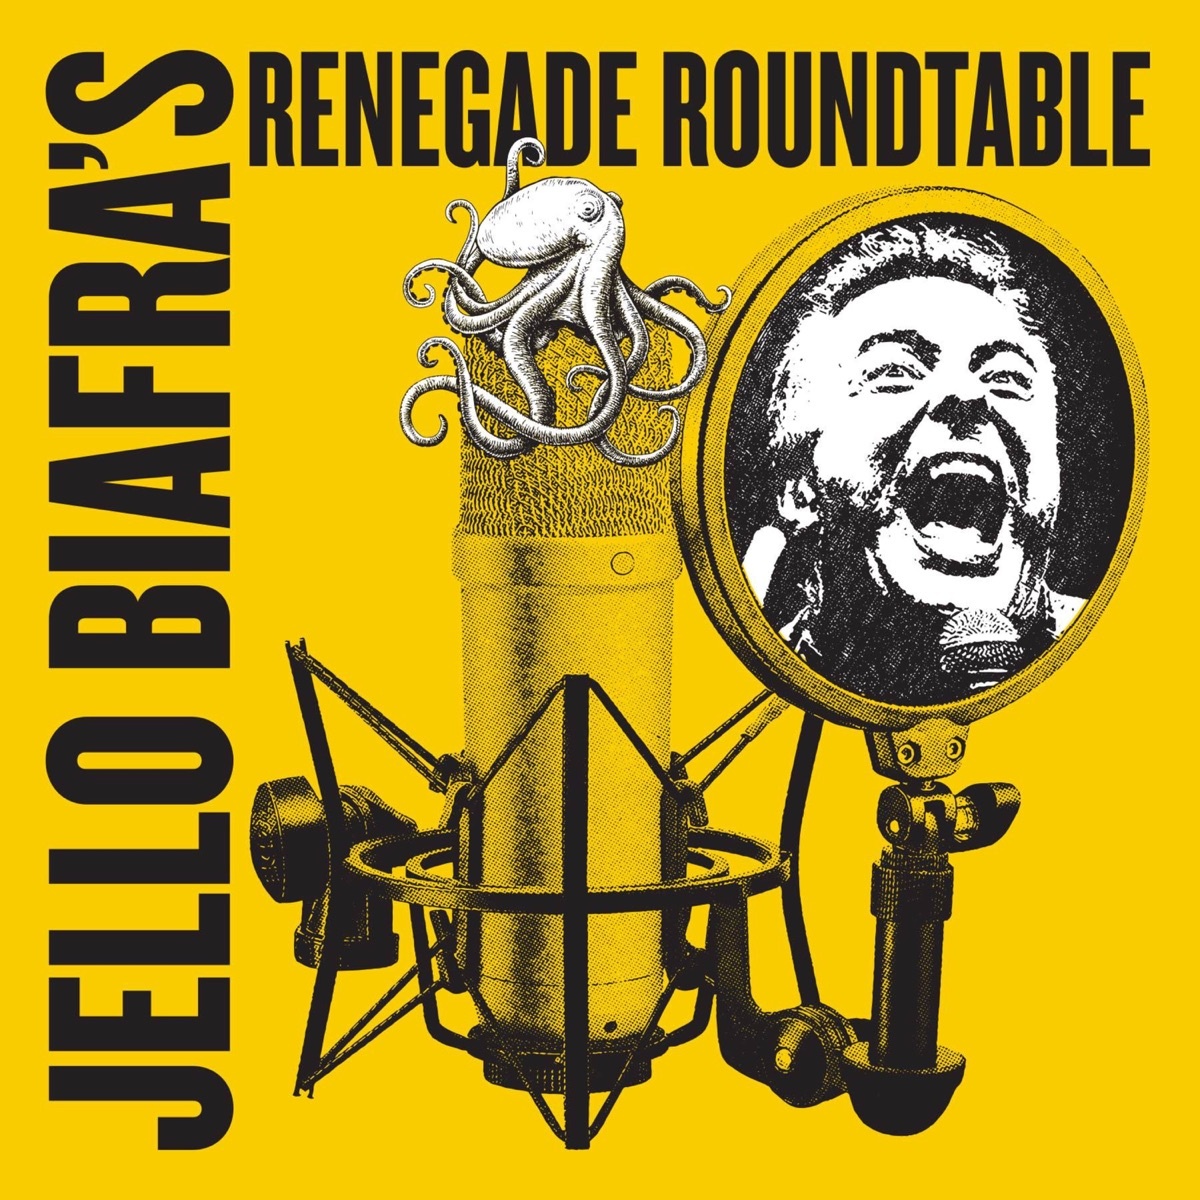 Listen To Jello Biafra's Renegade Roundtable With Ministry's Al Jourgensen